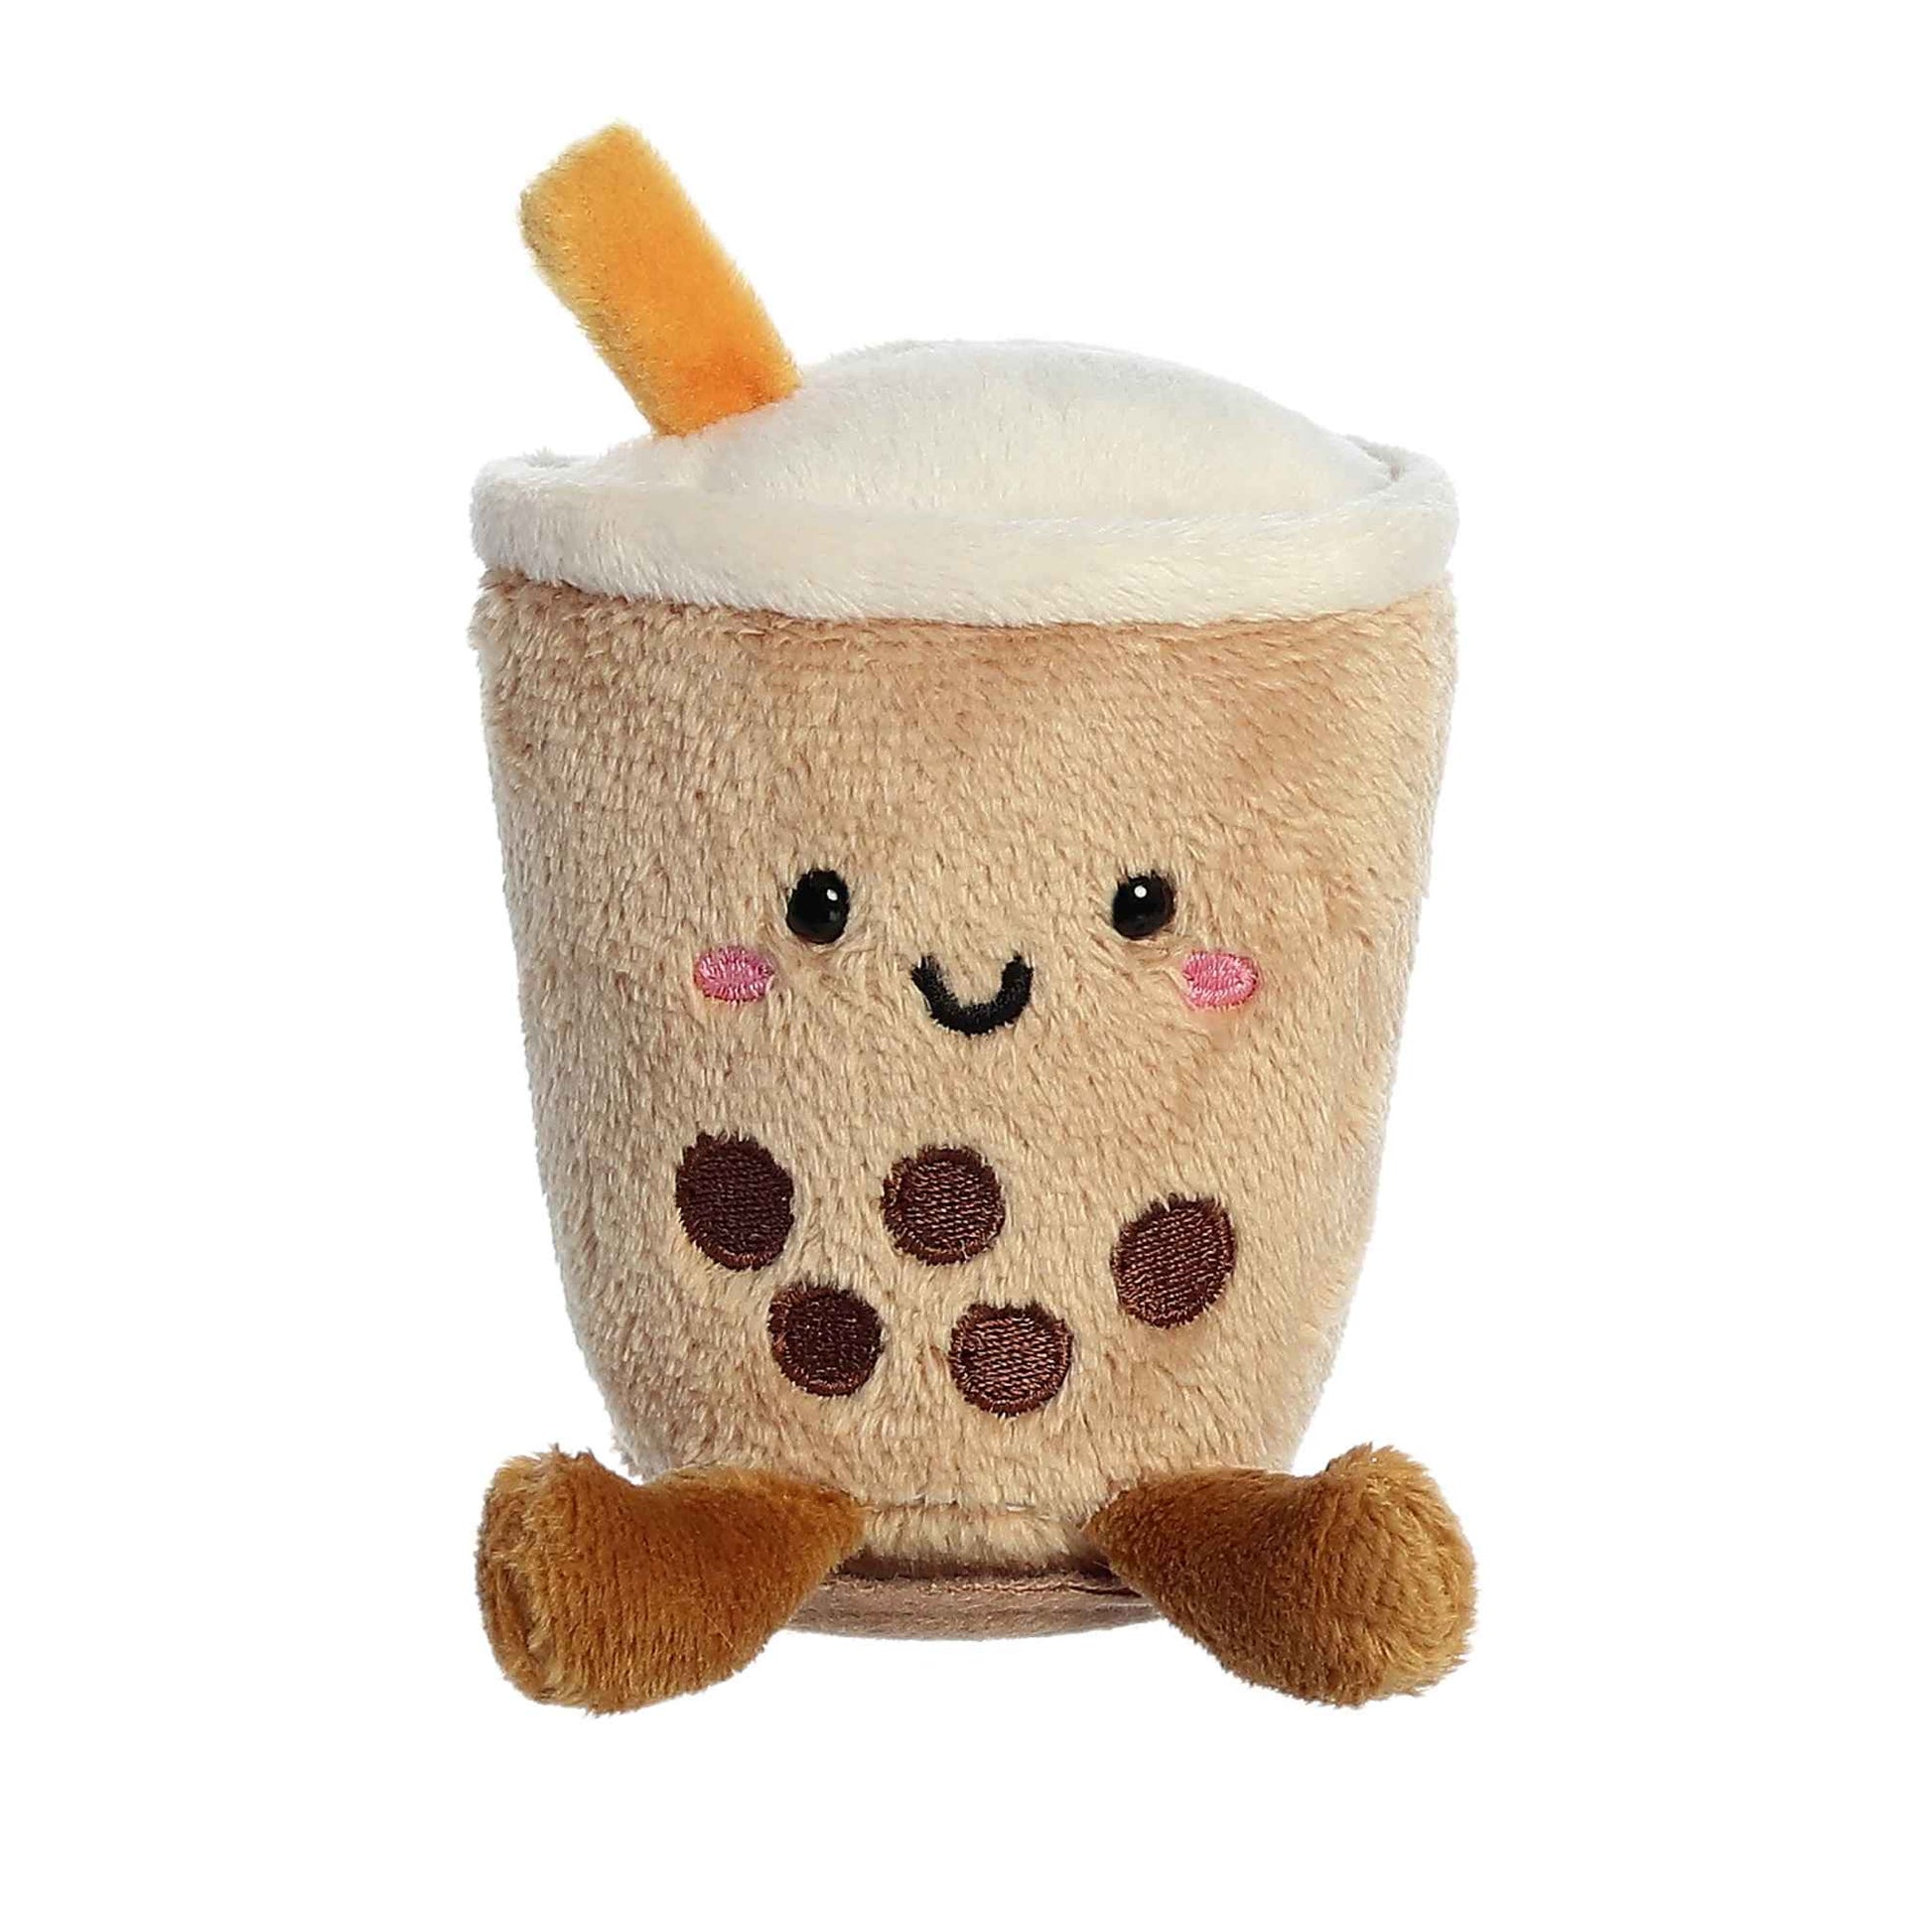 Bubbly Boba is an adorable little bubble boba tea friend.  The perfect gift for any foodie out there!  4.5 inches long from top to bottom High Quality Materials make for a soft and fluffy touch Sweet lovable facial expression This plush contains small parts that are suitable for ages 36 months and older